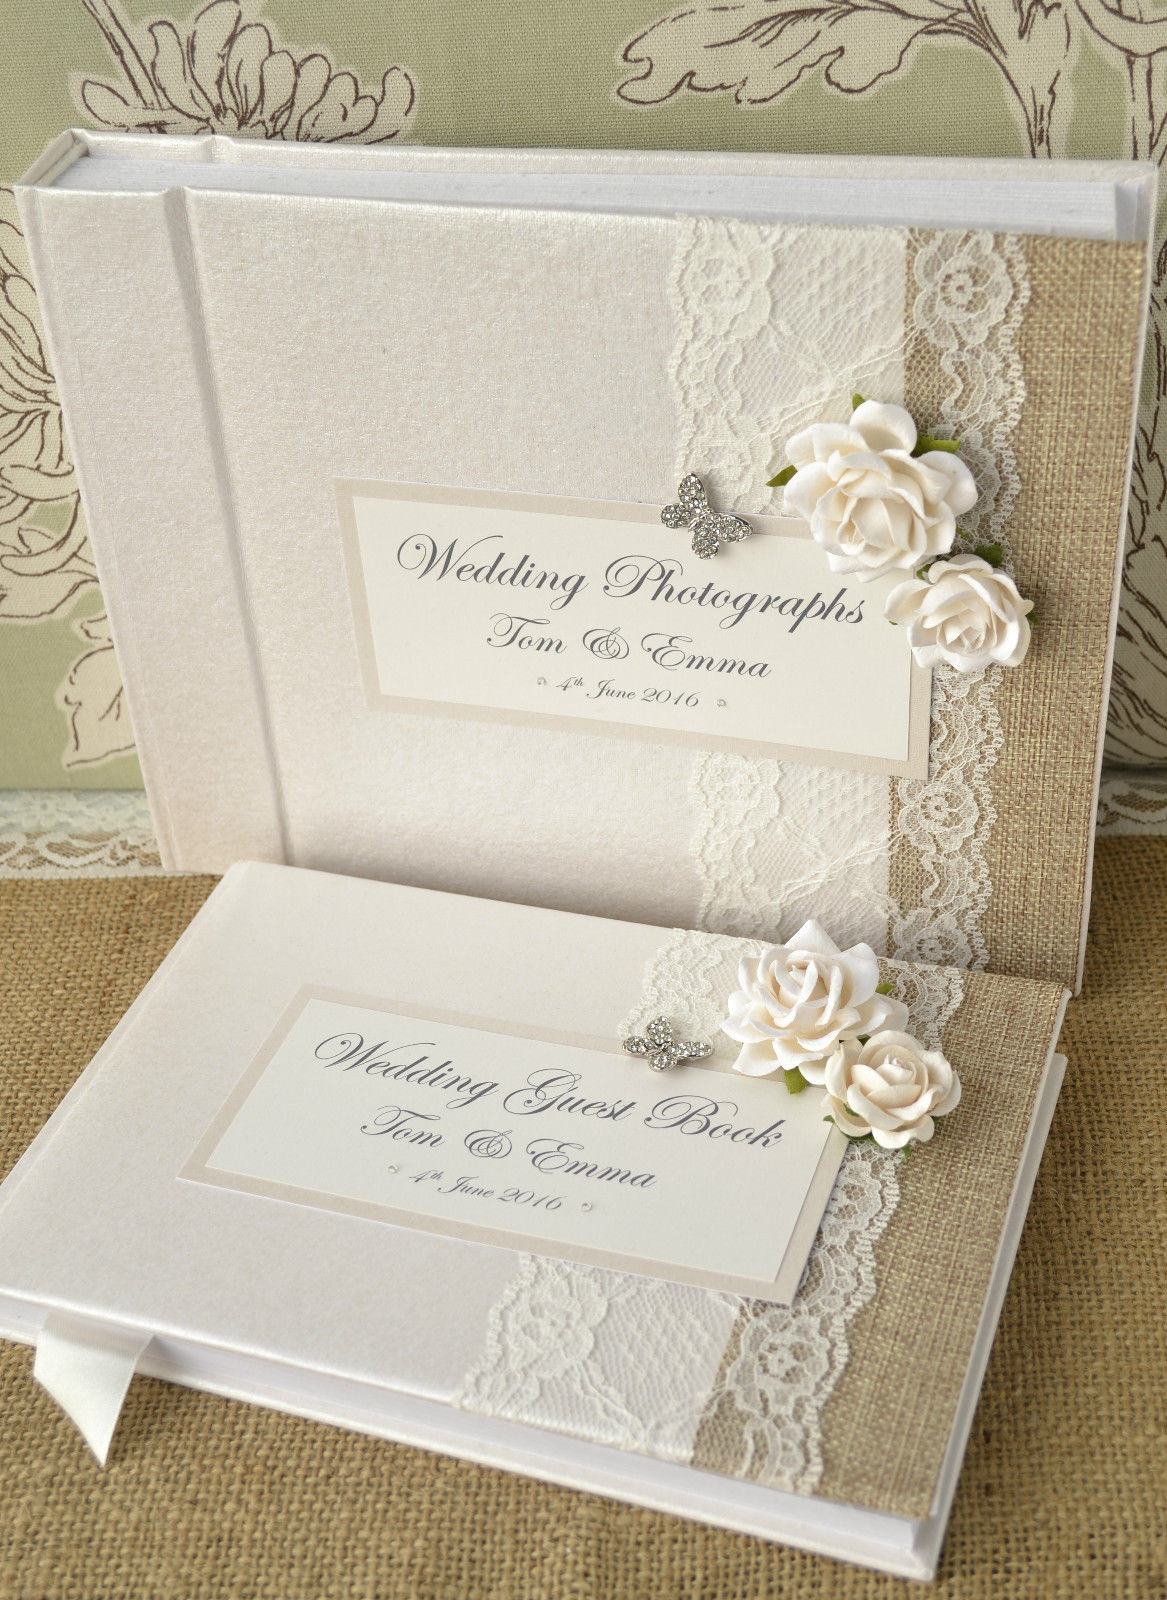 Photo Wedding Guest Books
 Luxury Personalised Wedding Guest Book & Album Set Lace